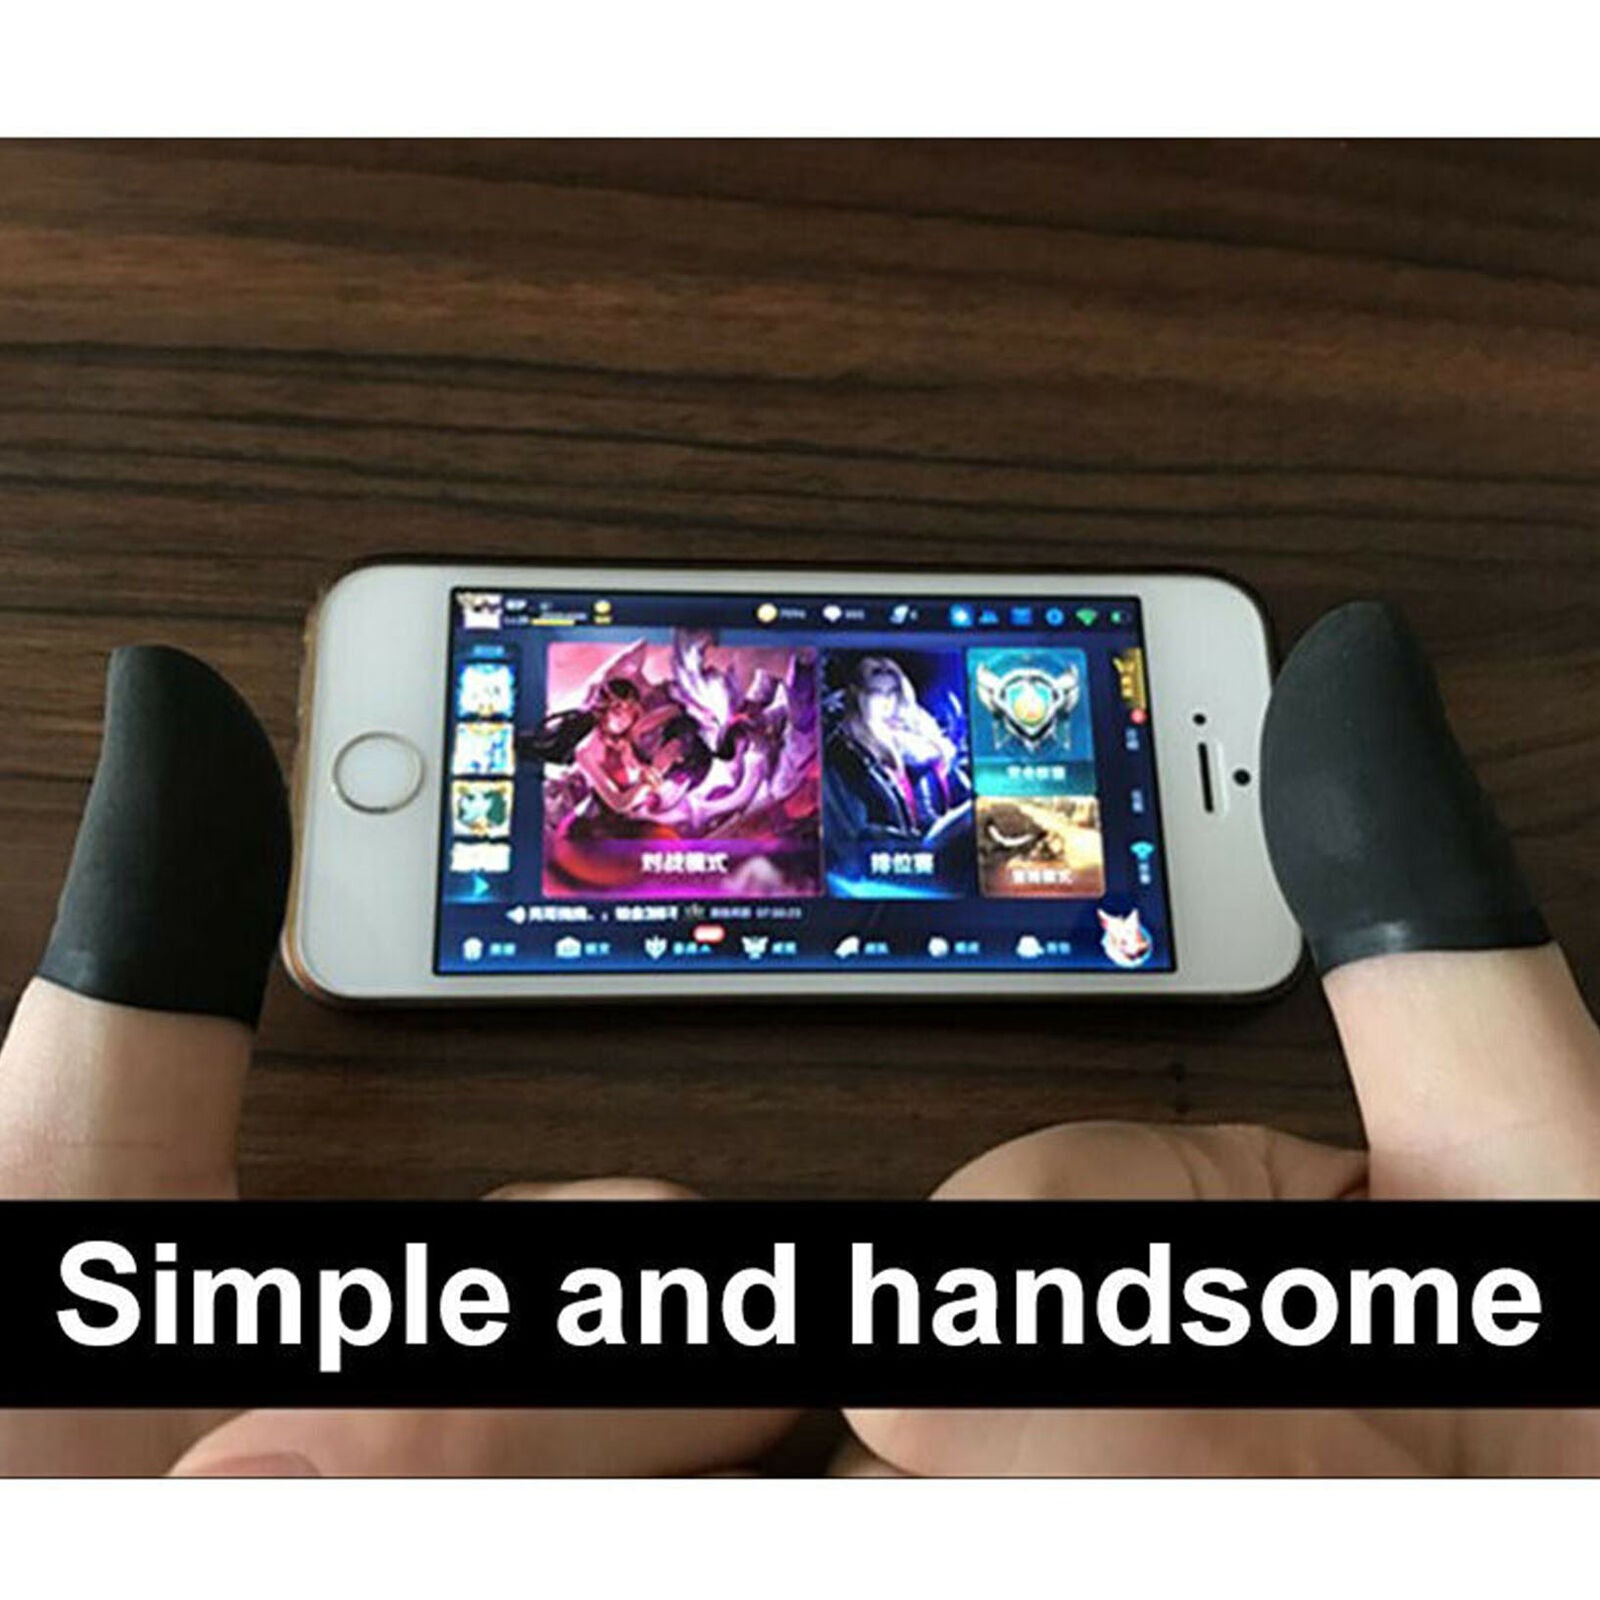 10Pcs Mobile Finger Sleeve Touch Screen Game Controller Sweatproof Gloves Black